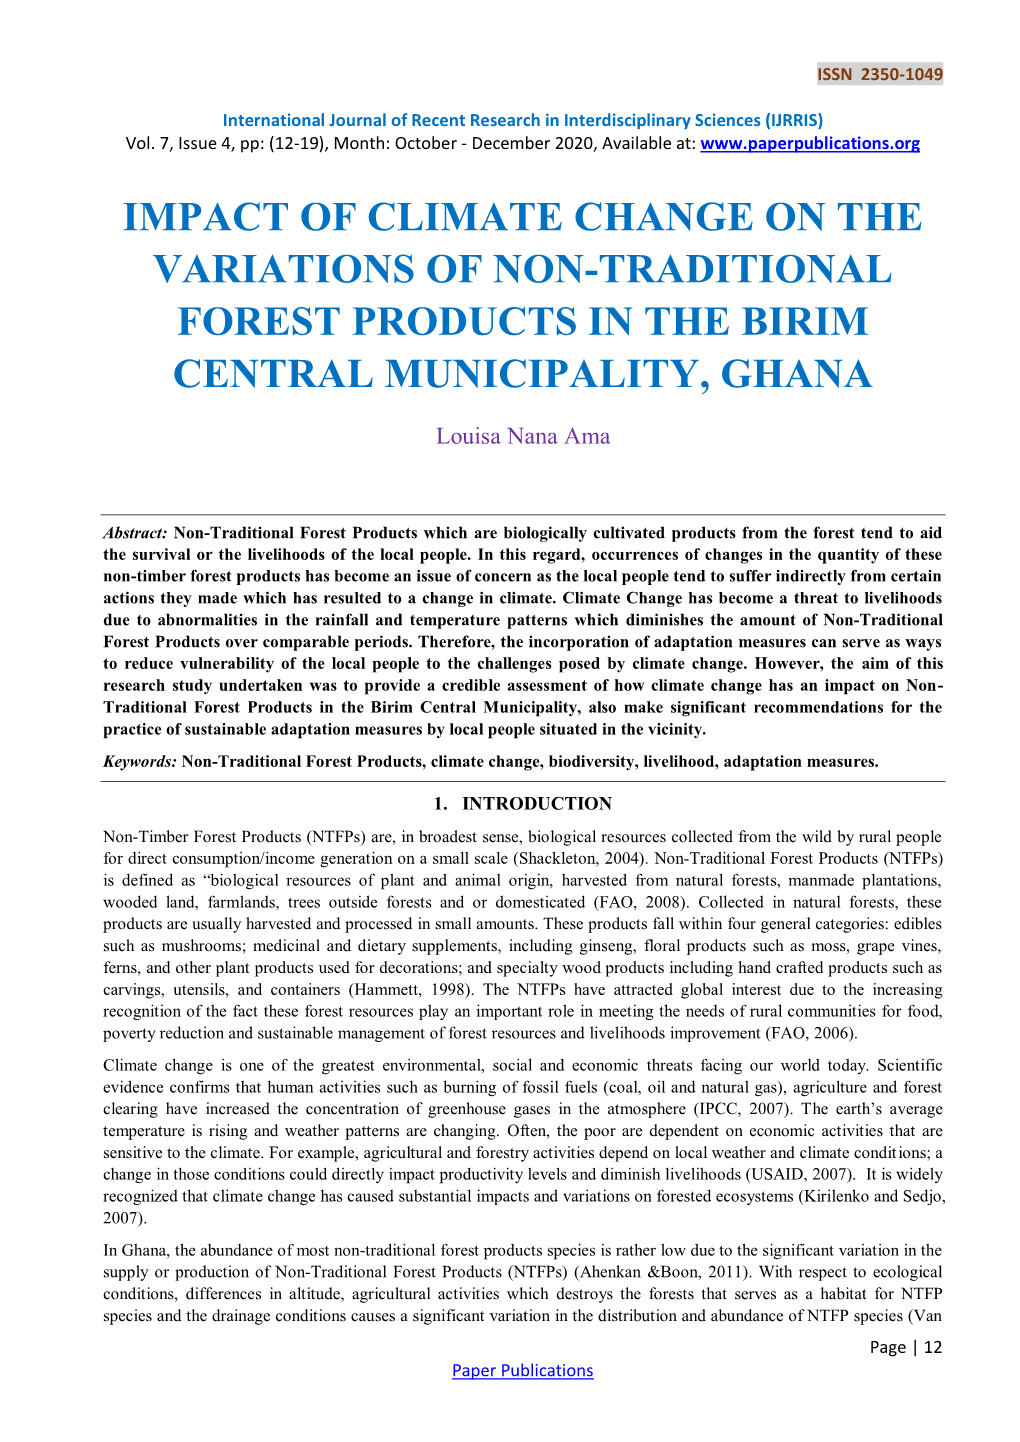 Impact of Climate Change on the Variations of Non-Traditional Forest Products in the Birim Central Municipality, Ghana